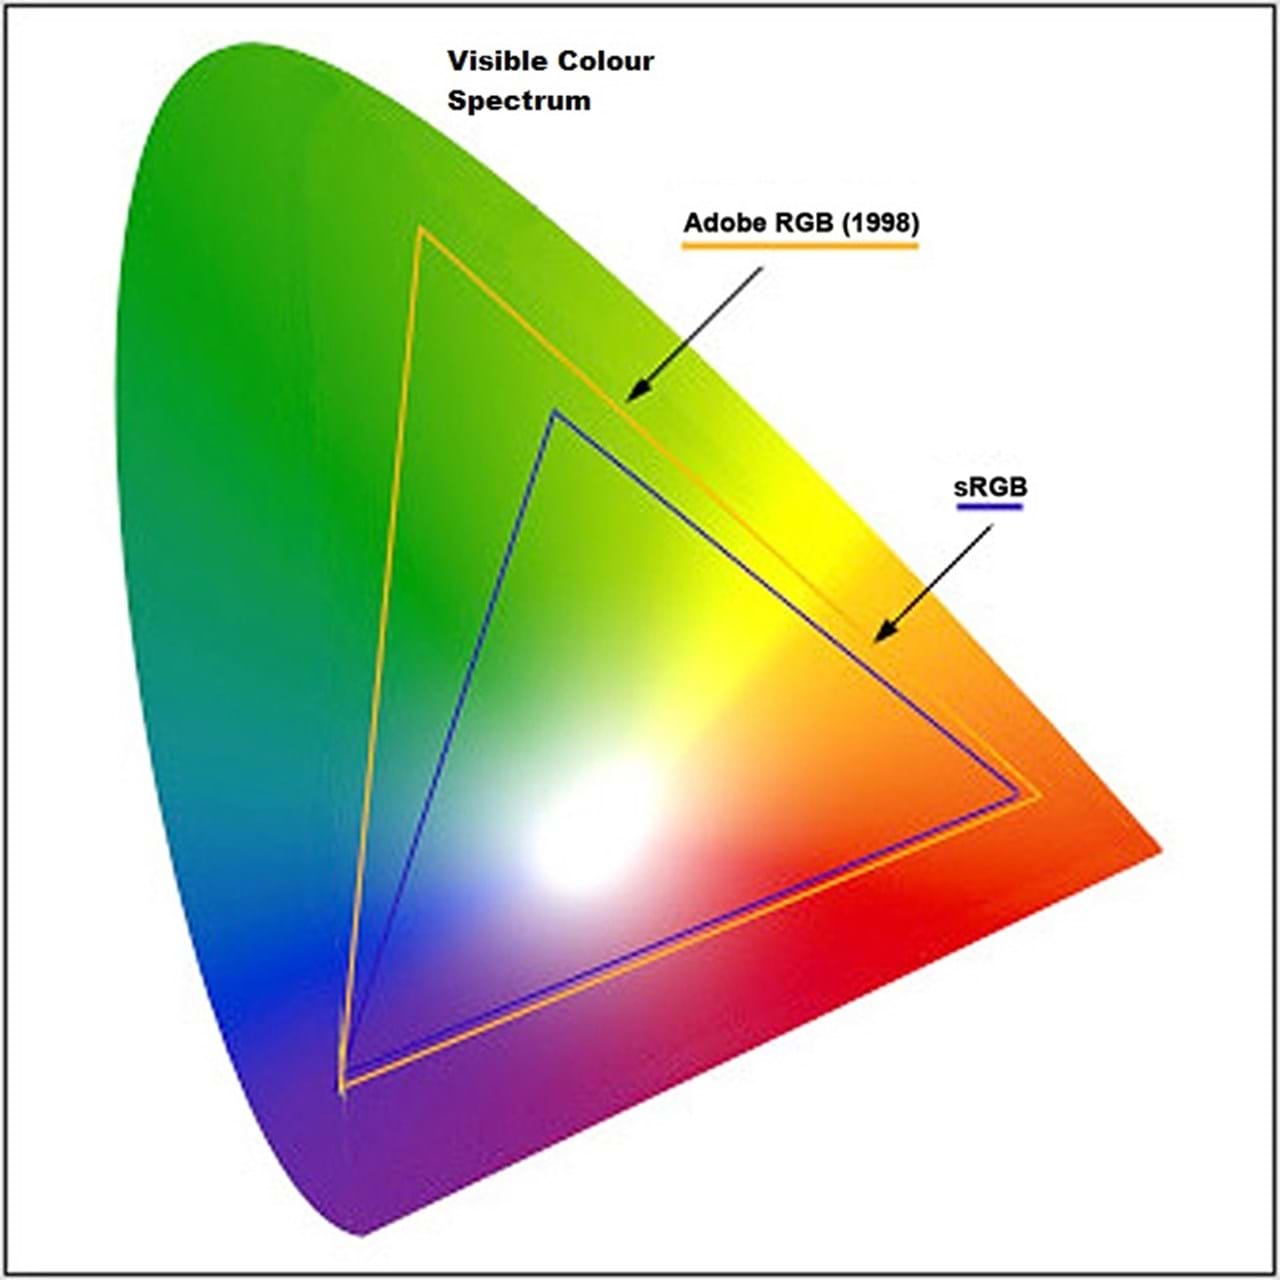 Visualisation of how the visible colour spectrum compares to the limited sRGB and wider aRGB colour spaces.